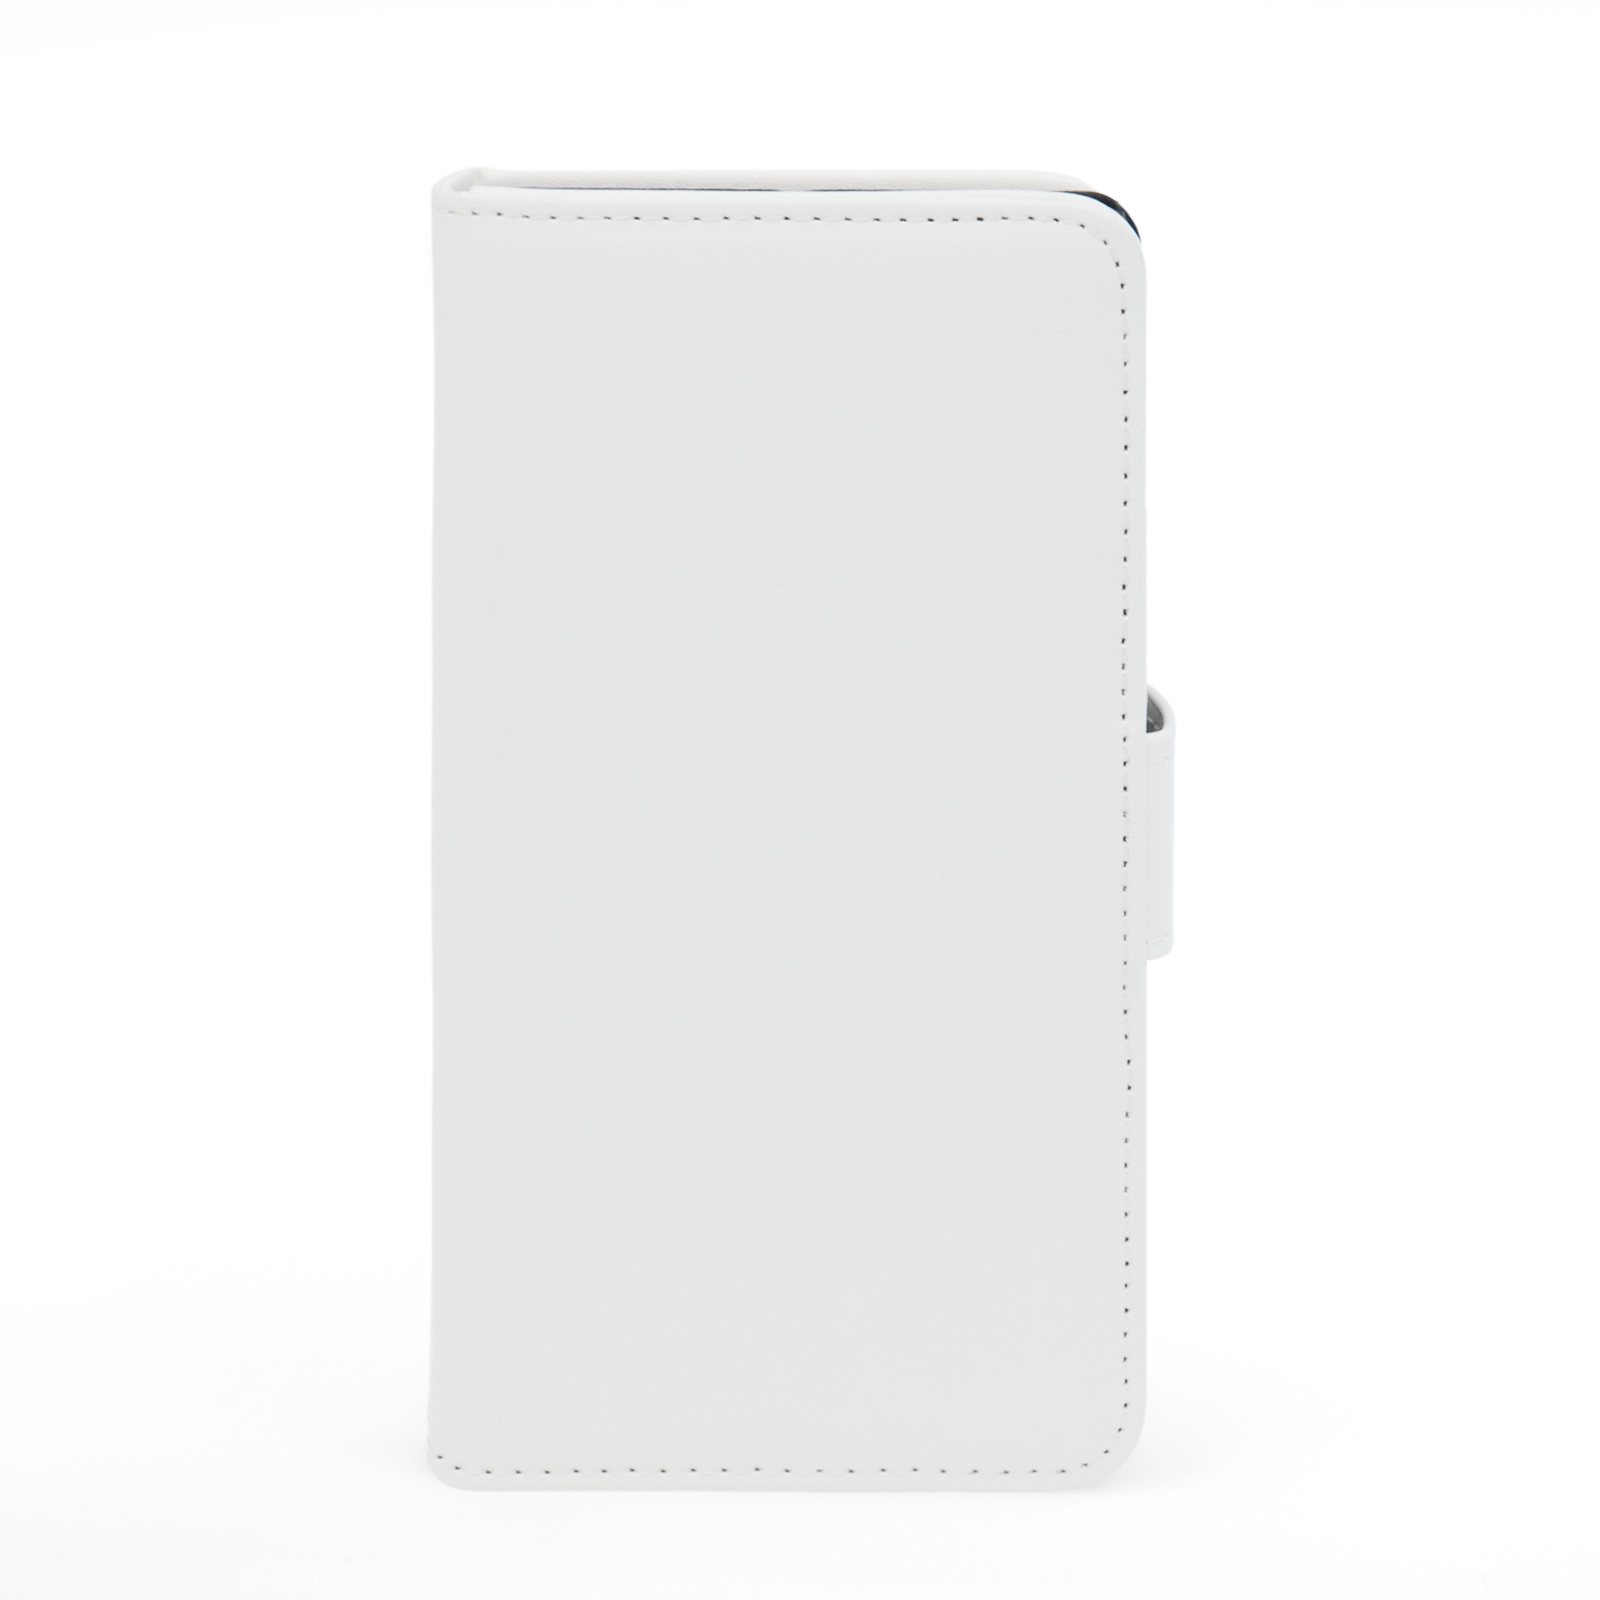 YouSave Accessories Nokia Lumia 930 Leather-Effect Wallet Case - White